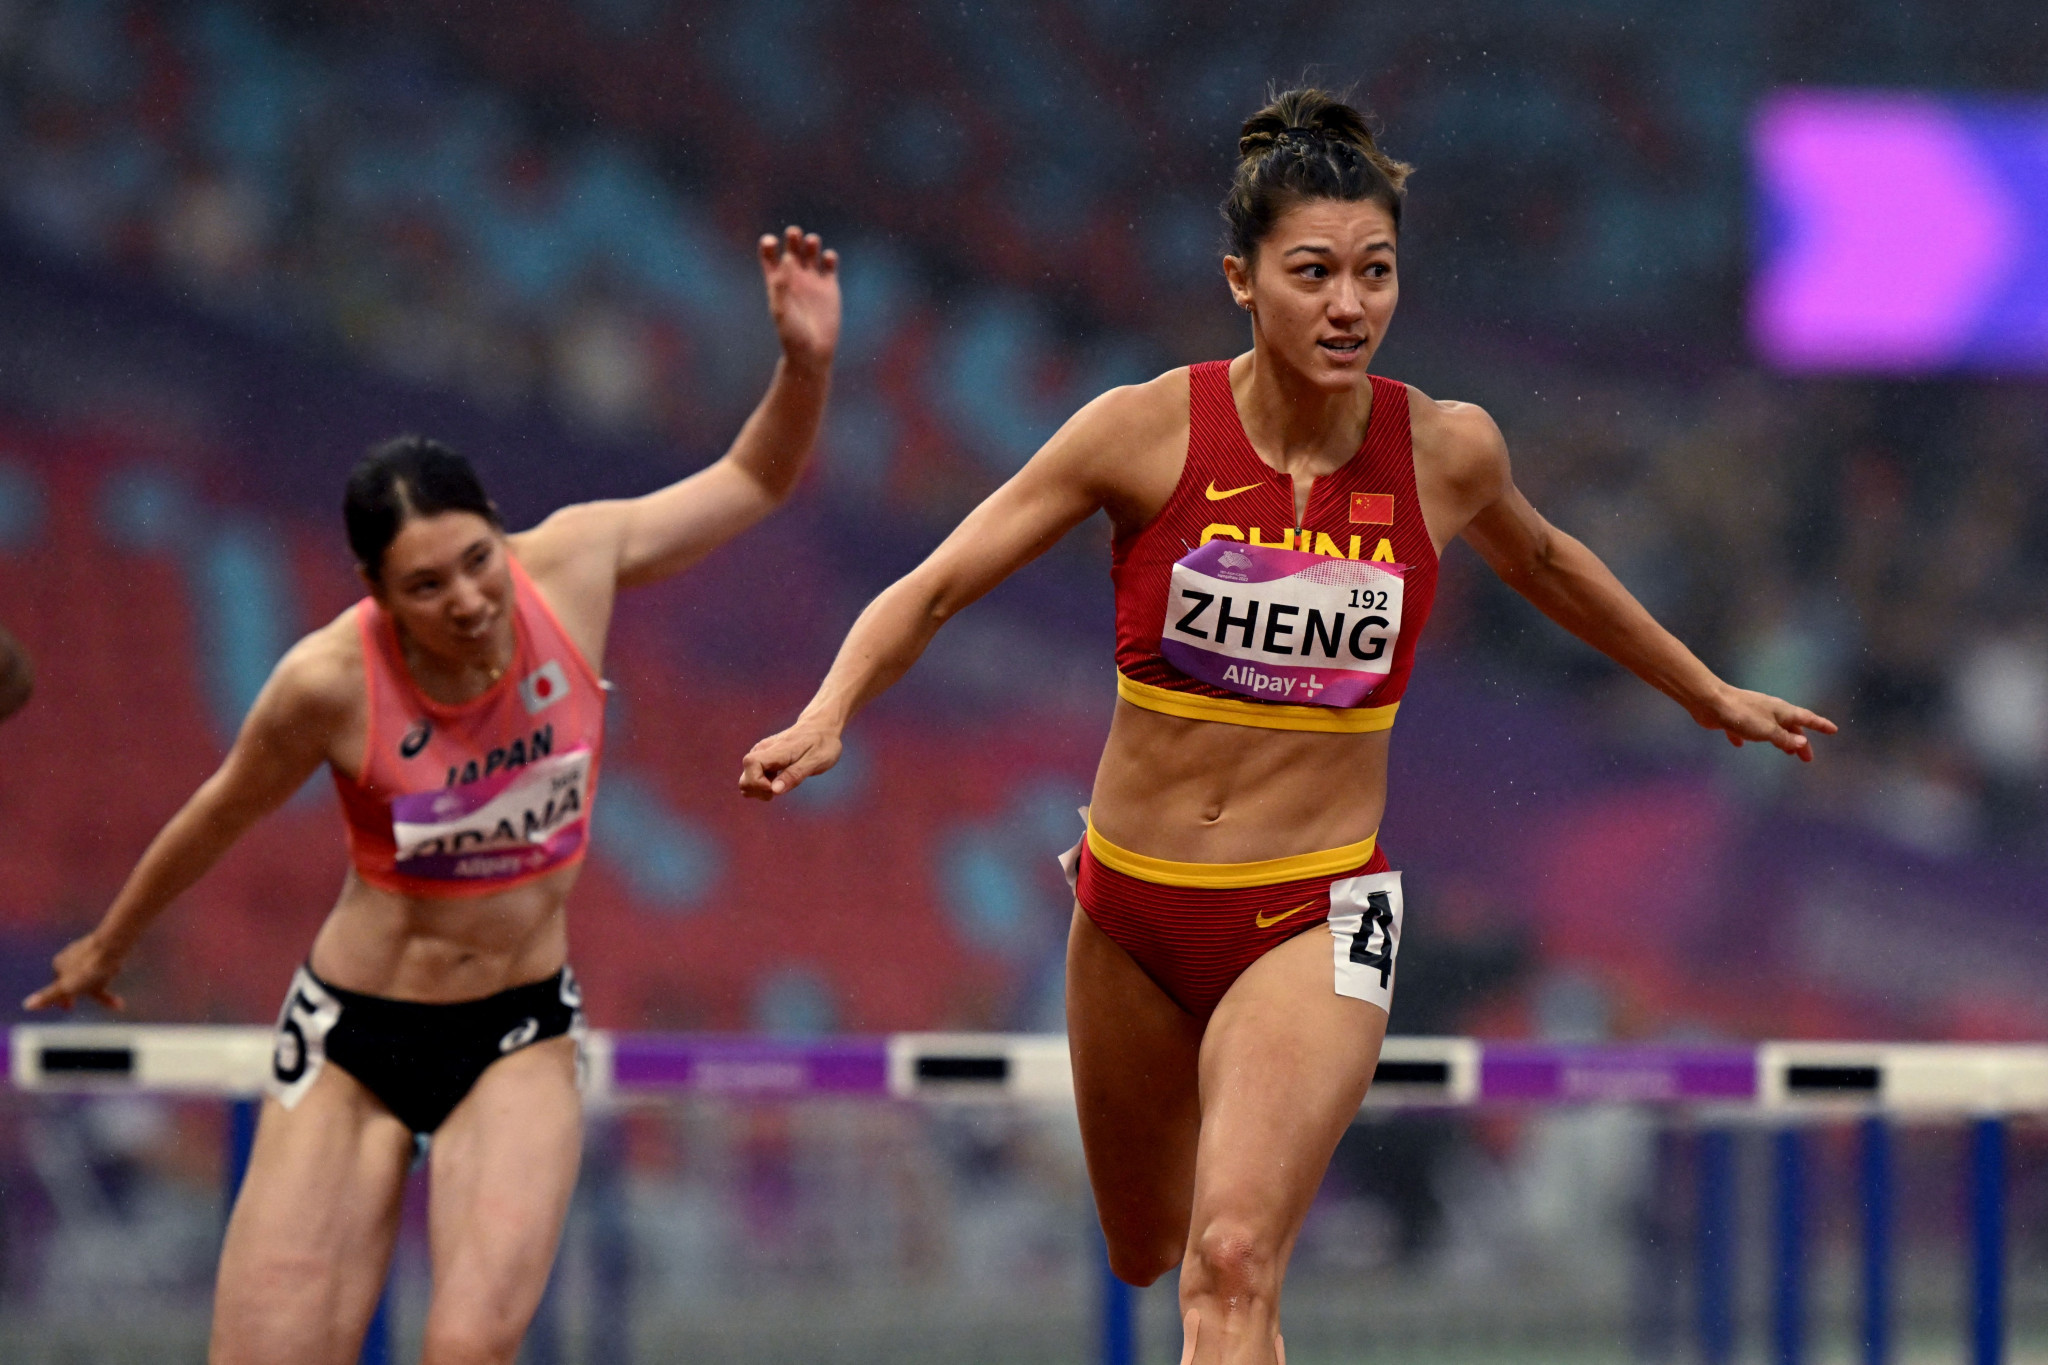 Home favourite Zheng Ninali had a day to remember as she topped the standings in the women's heptathlon event ©Getty Images